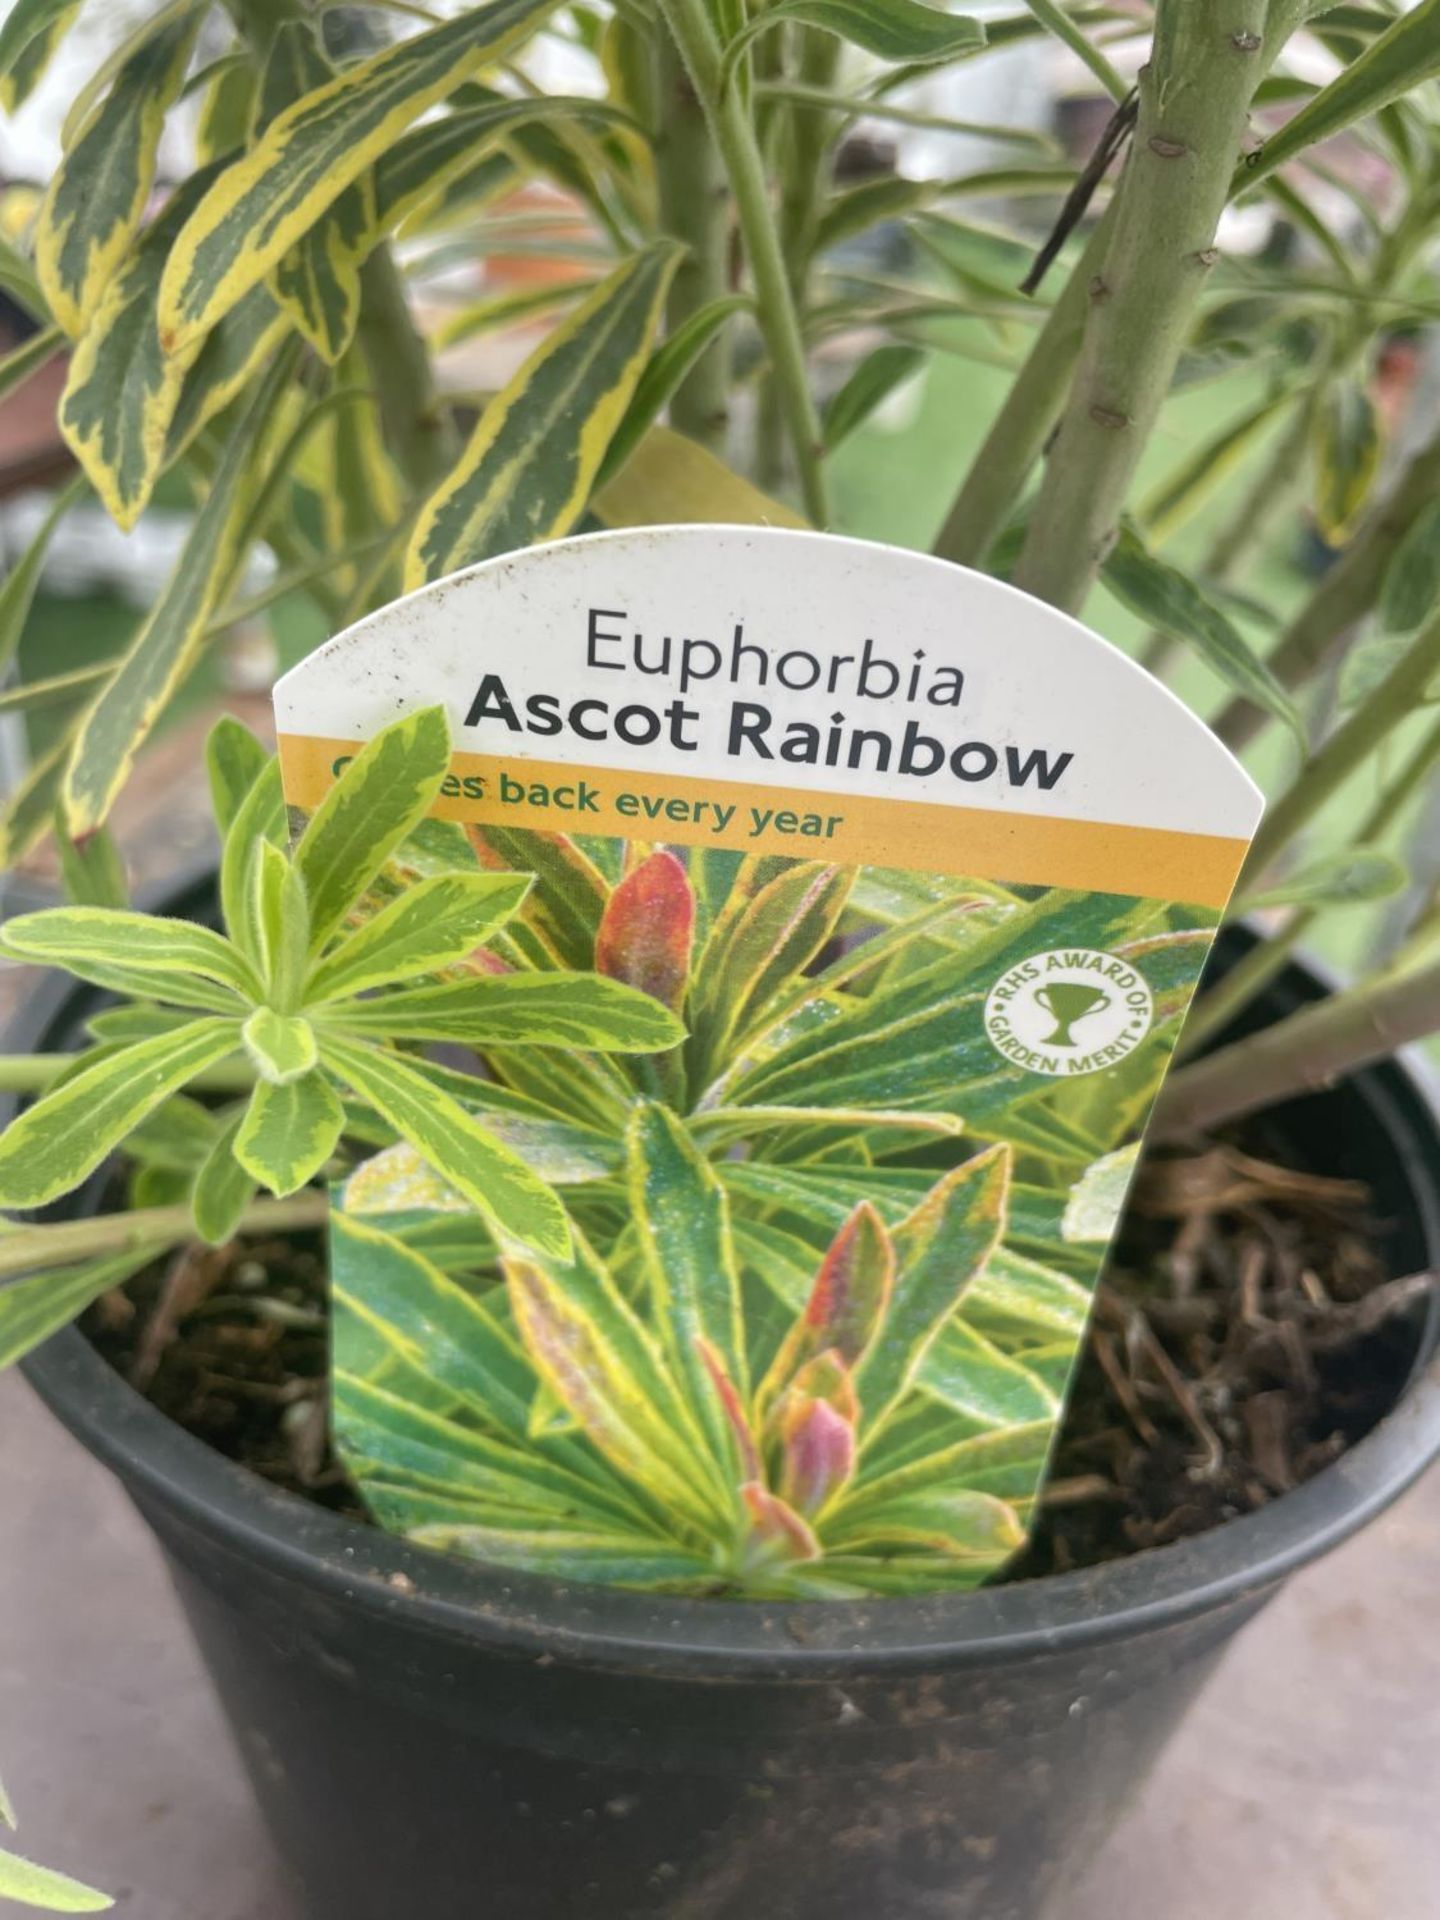 THREE EUPHORBIA ASCOT RAINBOW 90CM TALL TO BE SOLD FOR THE THREE IN 3 LTR POTS PLUS VAT